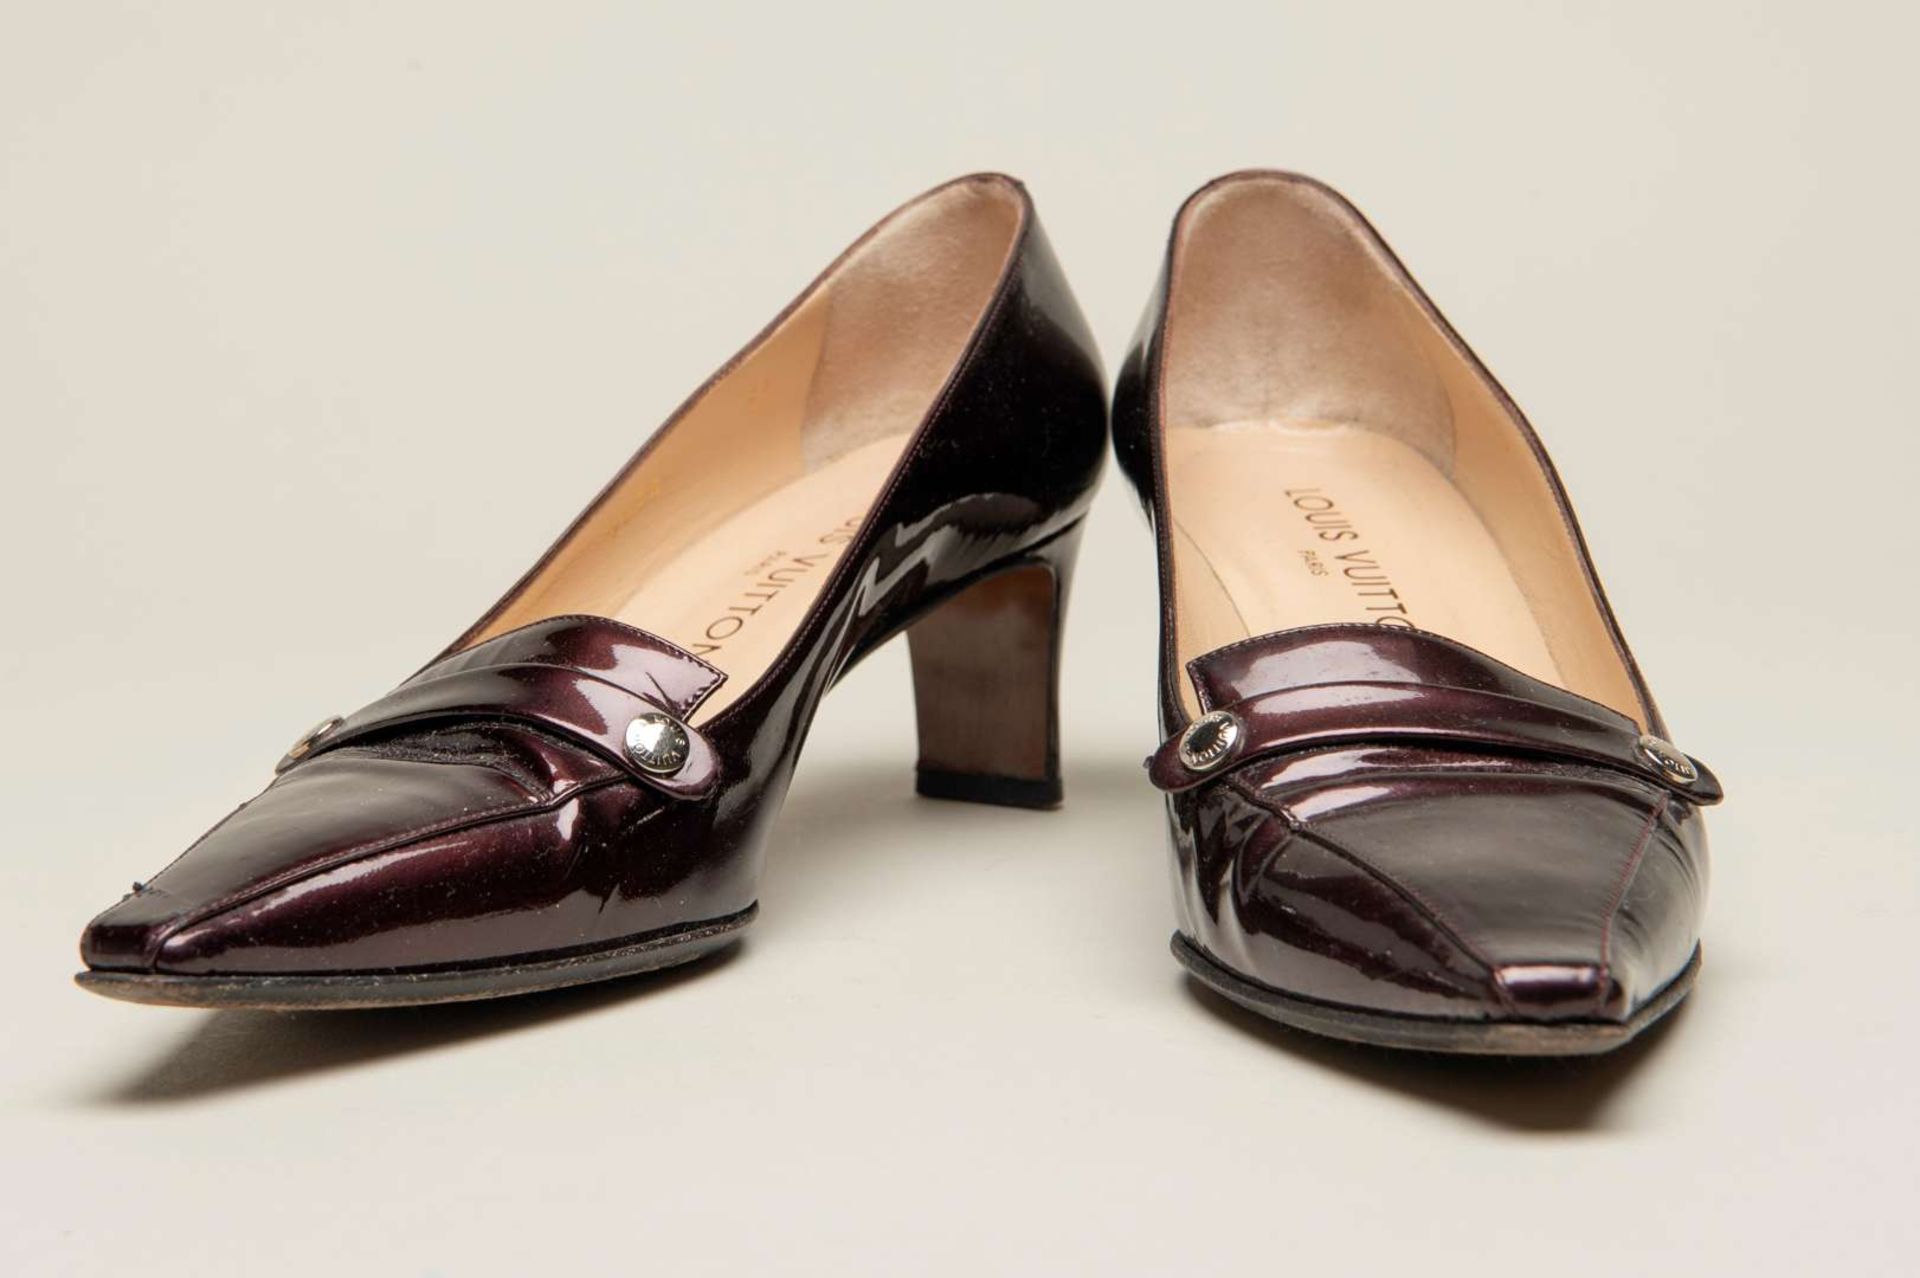 LOUIS VUITTON, a pair of dark bronze, patent leather pumps - Image 2 of 6